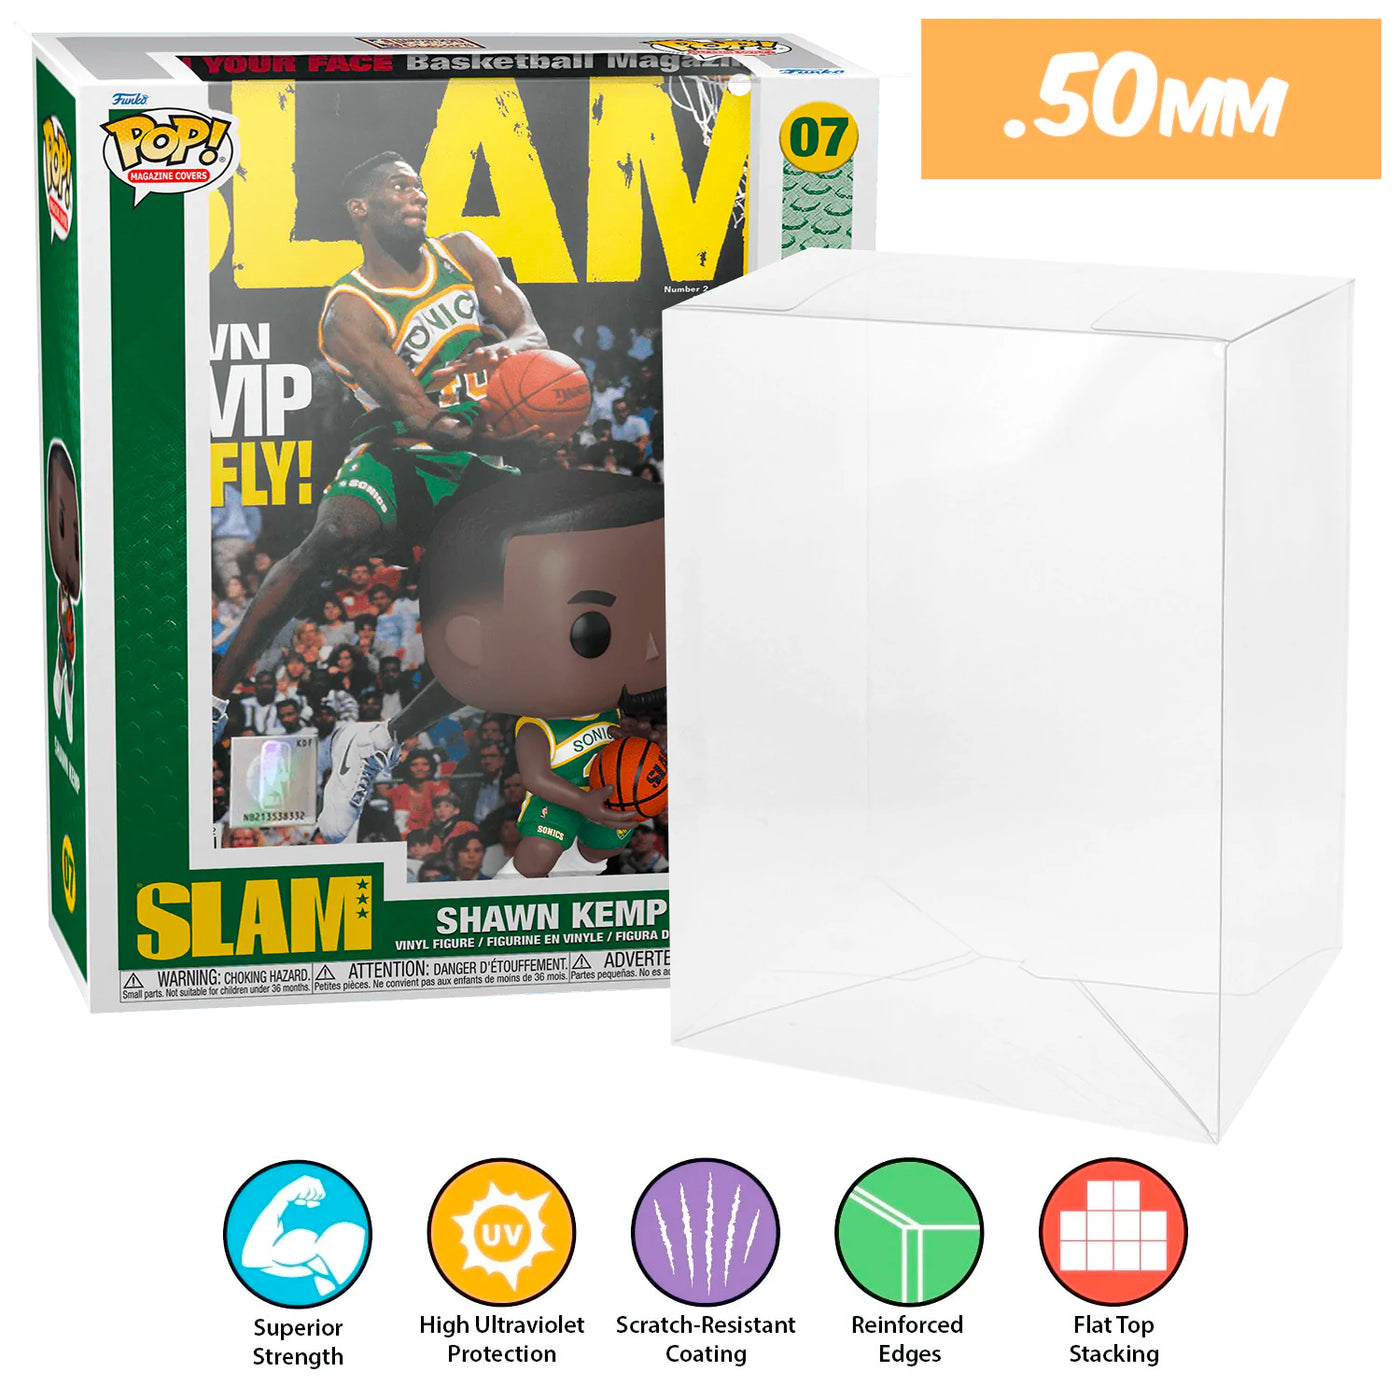 07 shawn kemp pop magazines covers slam nba best funko pop protectors thick strong uv scratch flat top stack vinyl display geek plastic shield vaulted eco armor fits collect protect display case kollector protector